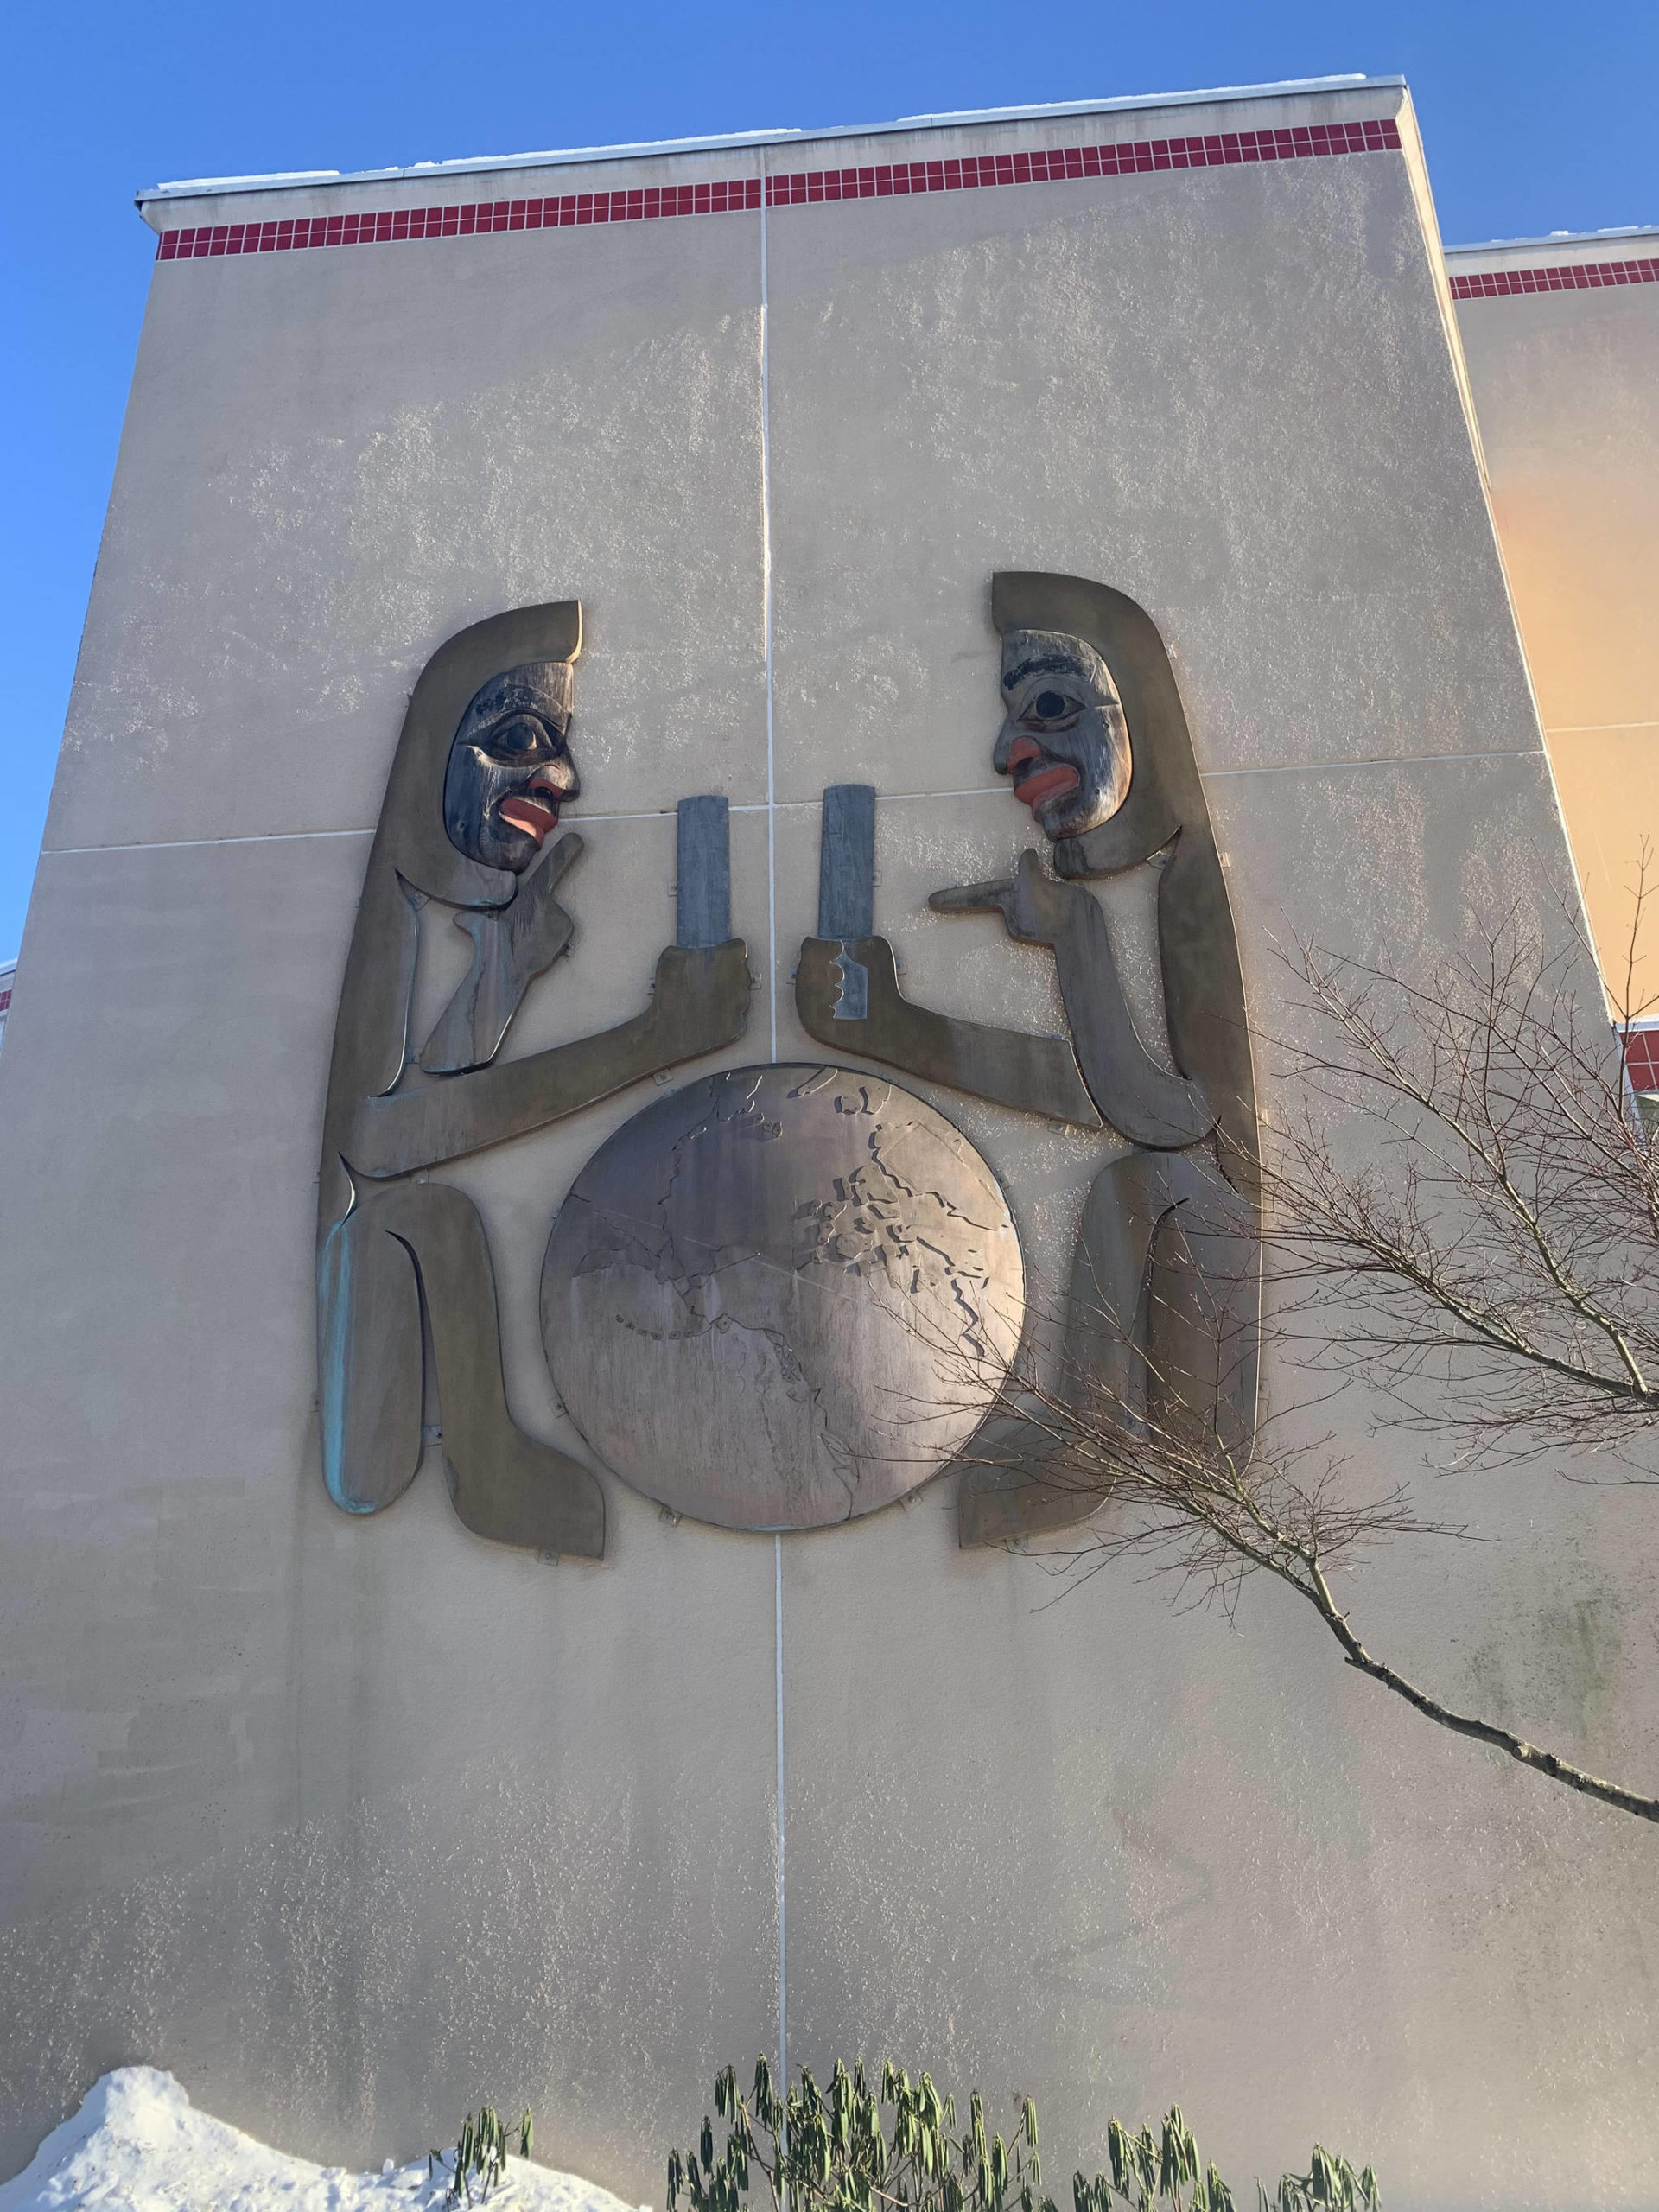 Examples of Nathan Jackson’s art appear on the Juneau Empire office building. This hanging sculpture was created in 1986 and is modeled after a set of twins in Jackson’s family. He explained that the twins often did things that were controversial, just like the world is often controversial. (Dana Zigmund/Juneau Empire)